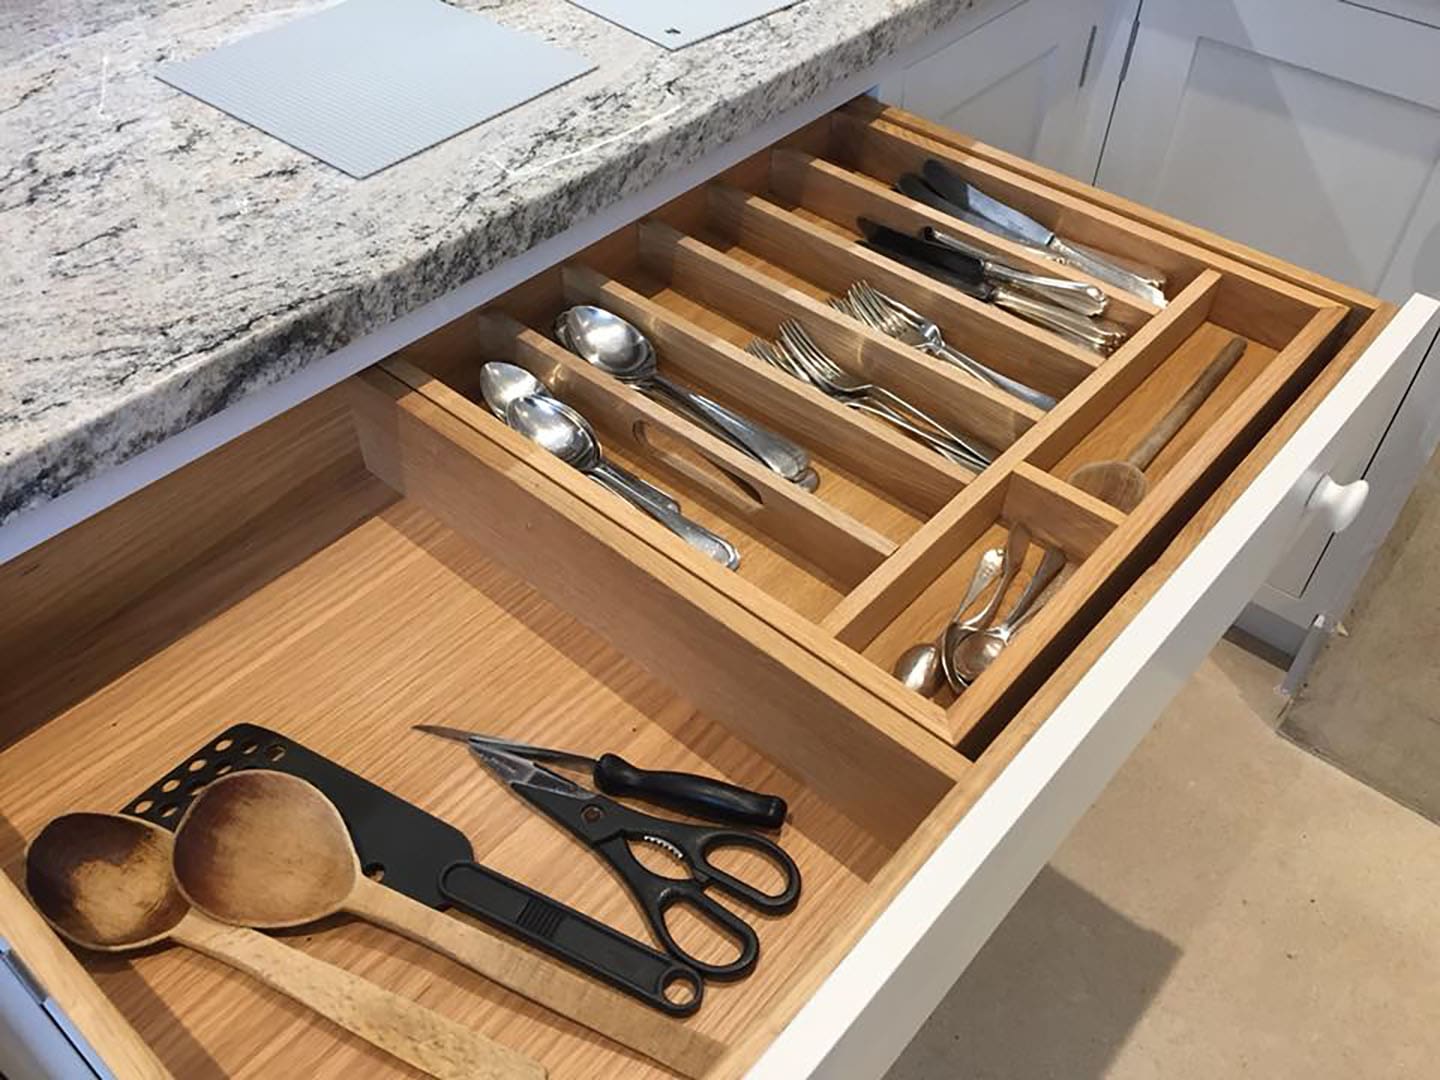 The cutlery draw showing the utensils inside.